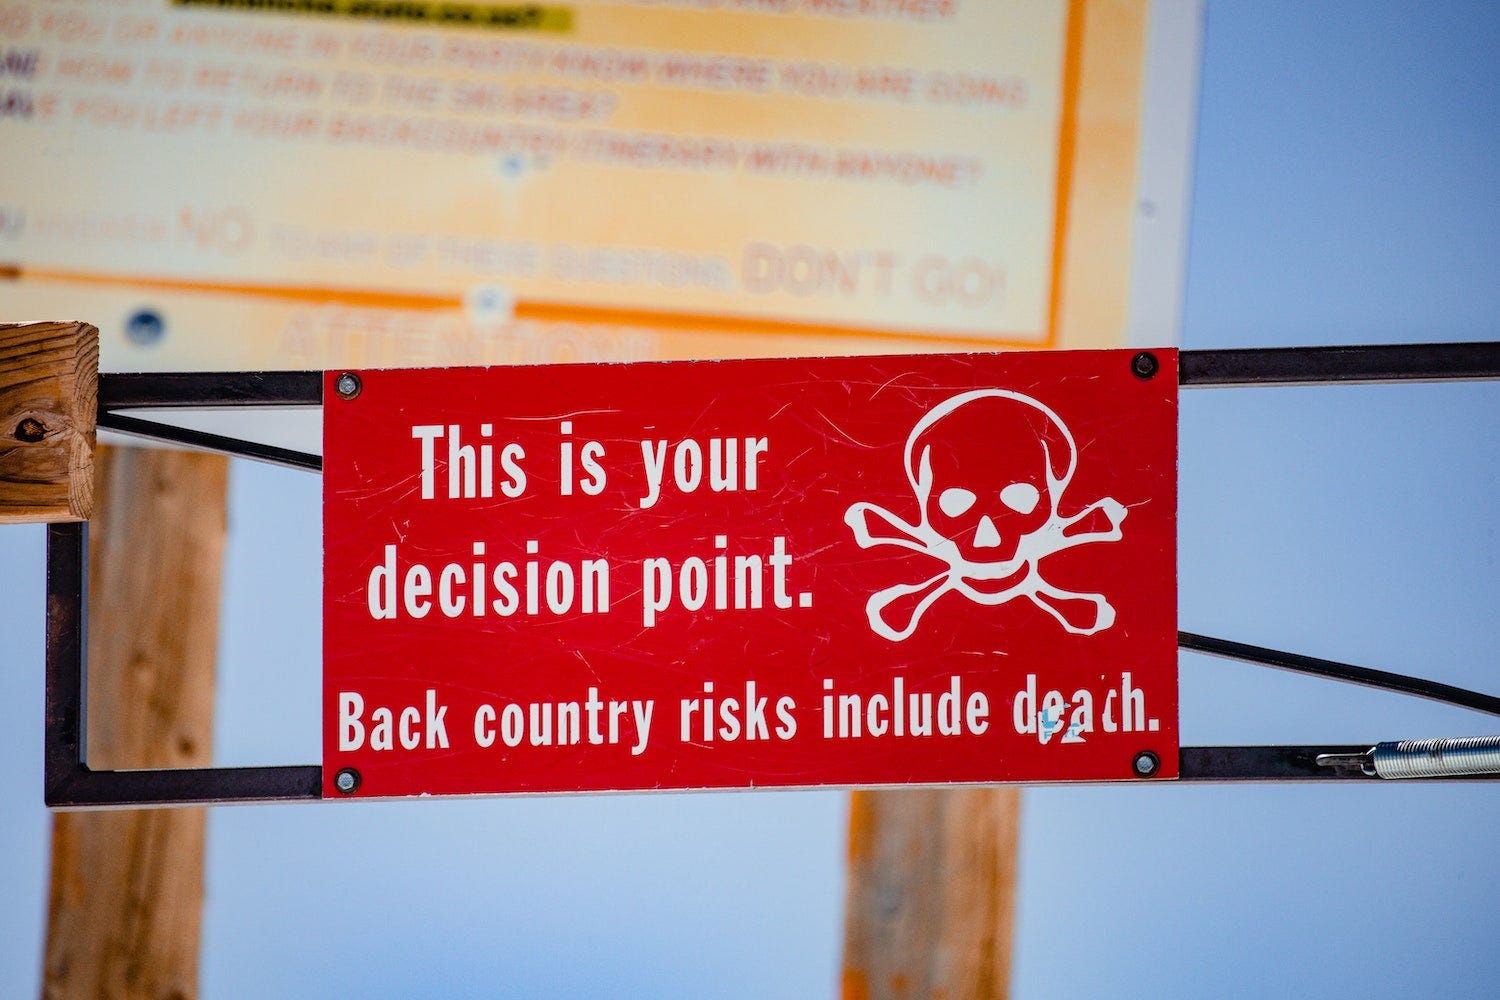 red sign with skull and cross bones reading "This is your decision point back country risks include death" showing severity of making some decisions